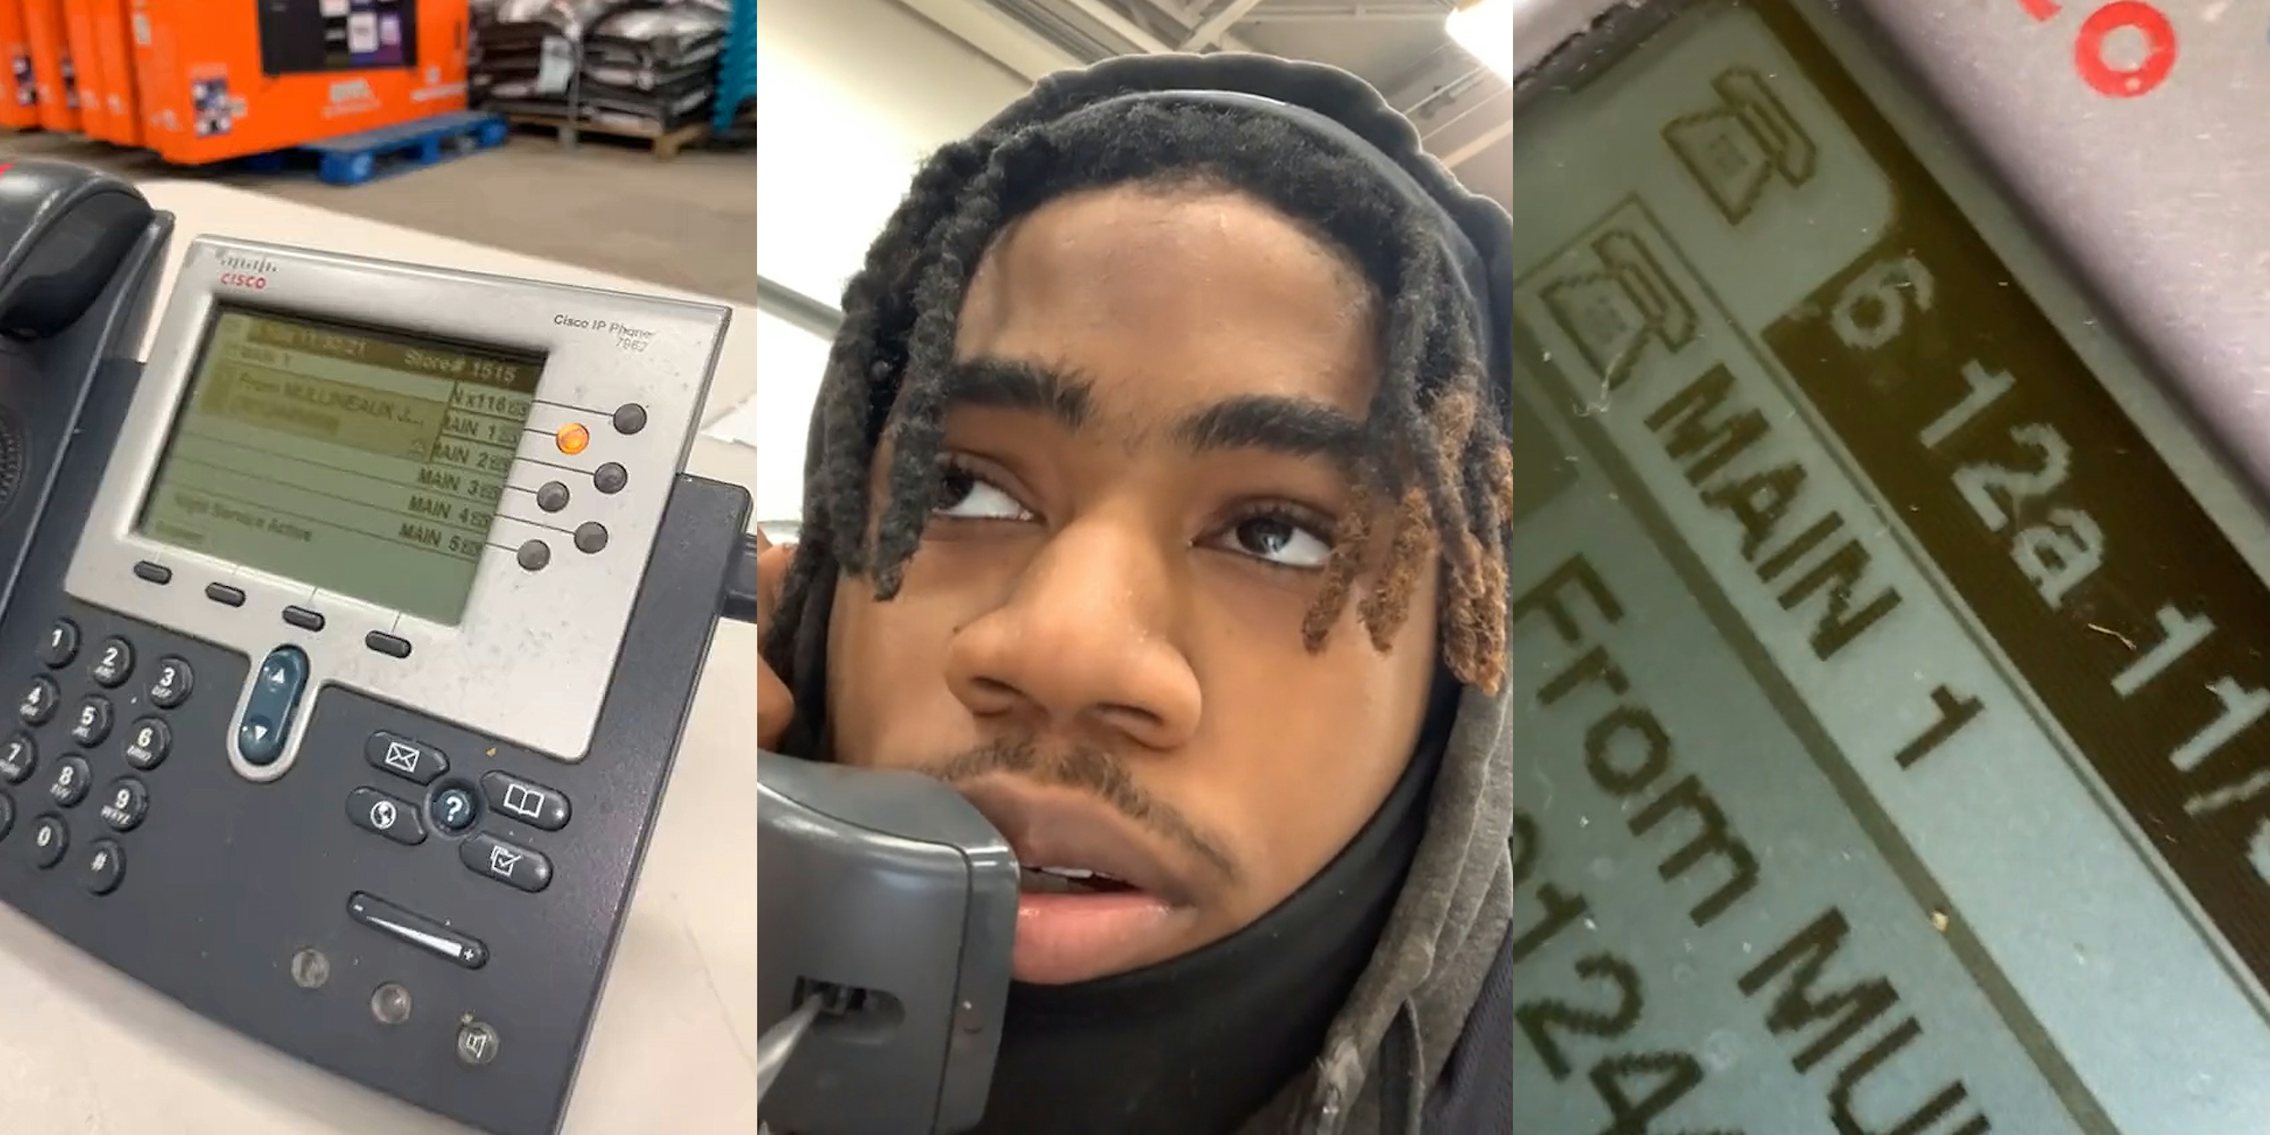 Walmart phone on table (l) Walmart employee speaking into phone (c) Walmart phone with screen text '6:12a' (r)